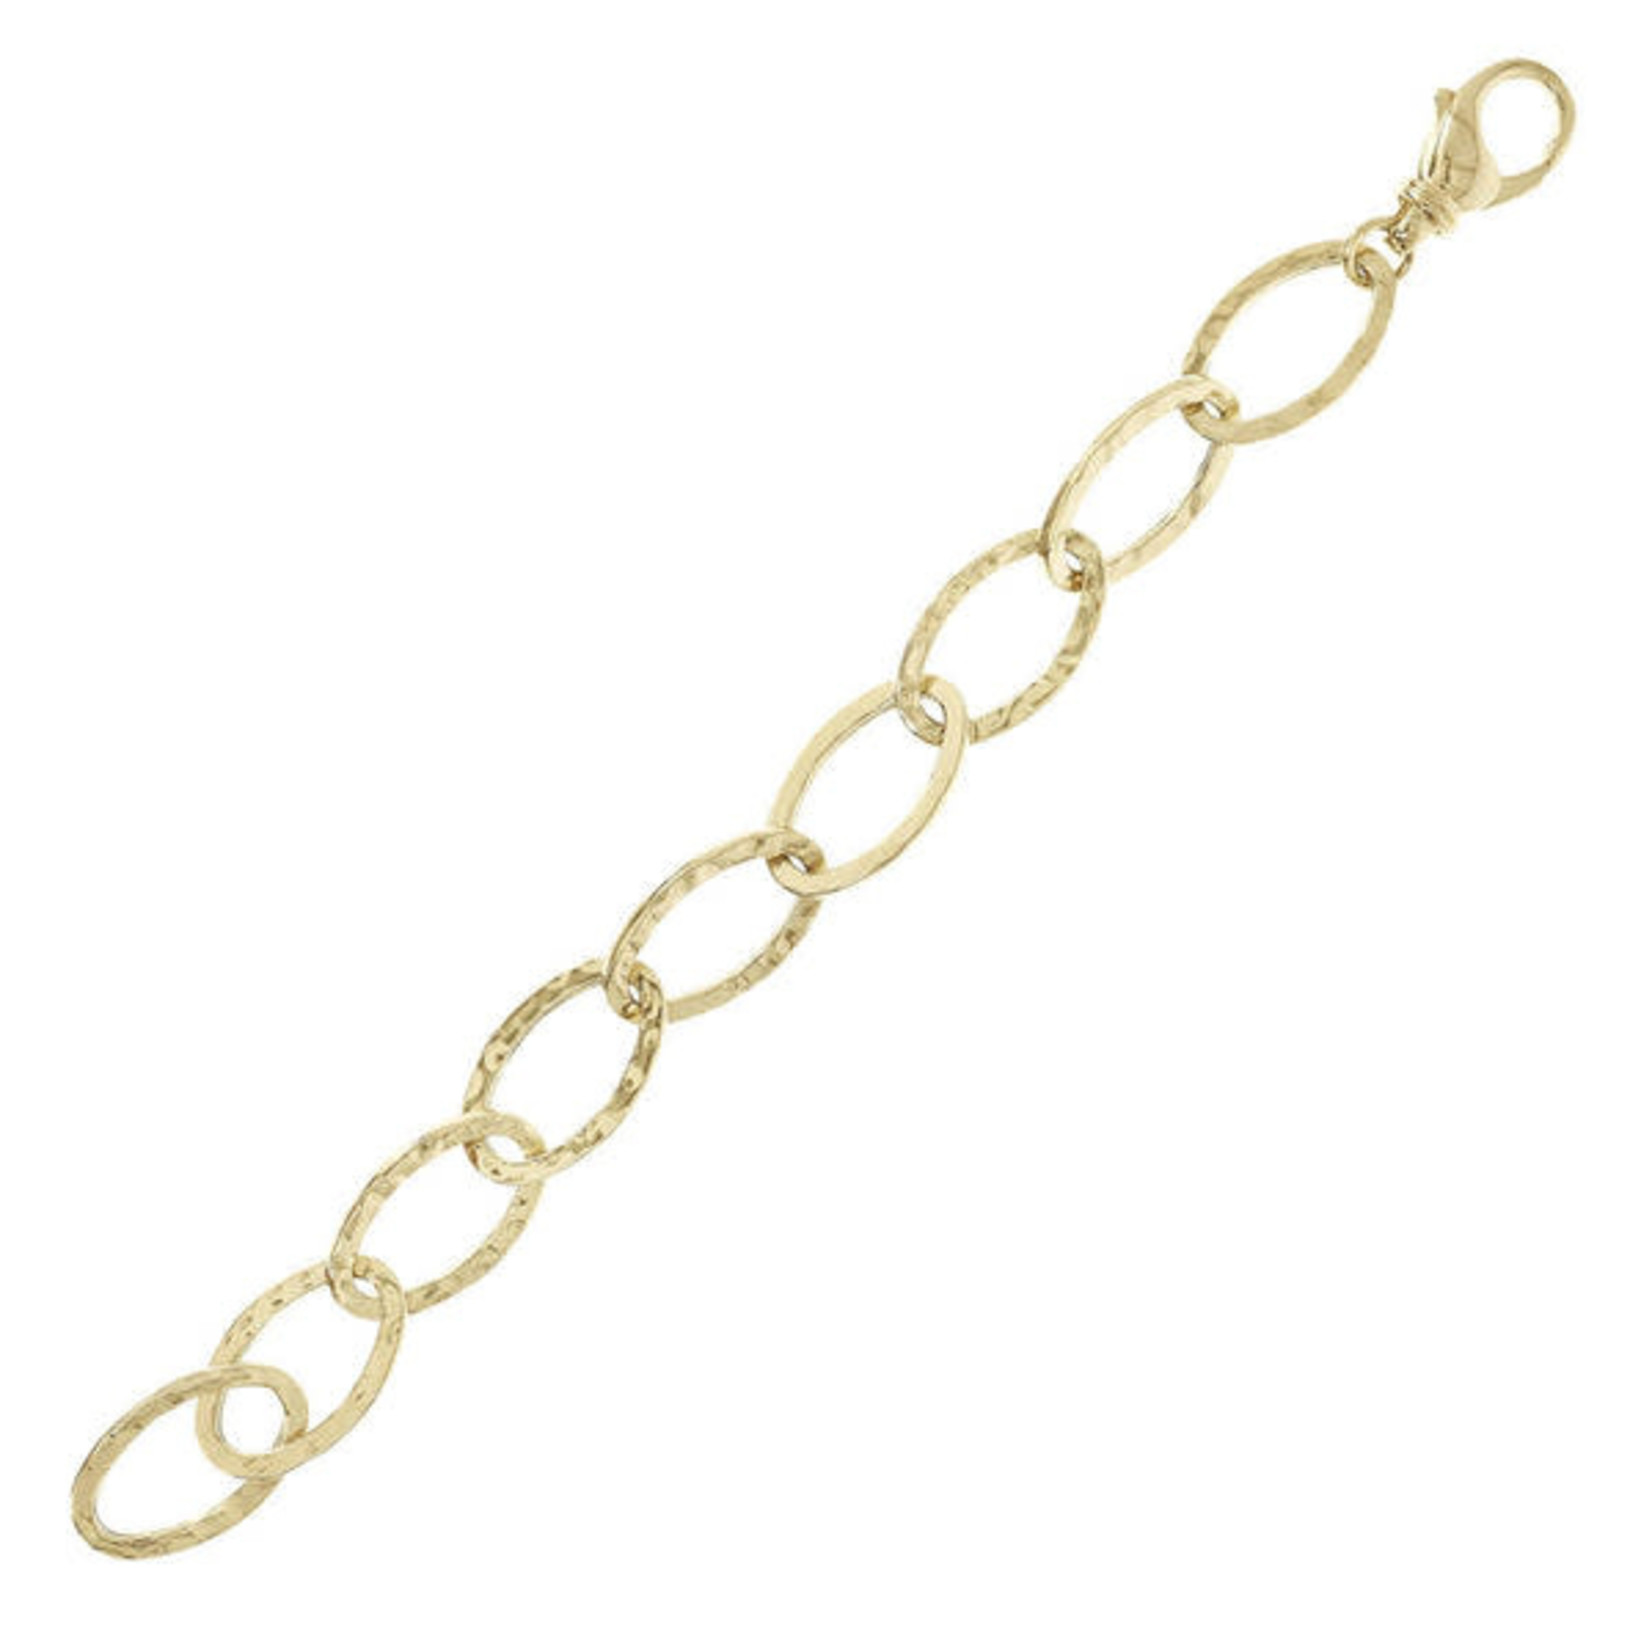 ETRUSCA ETRUSCA Short Bracelet with Hammered Chain